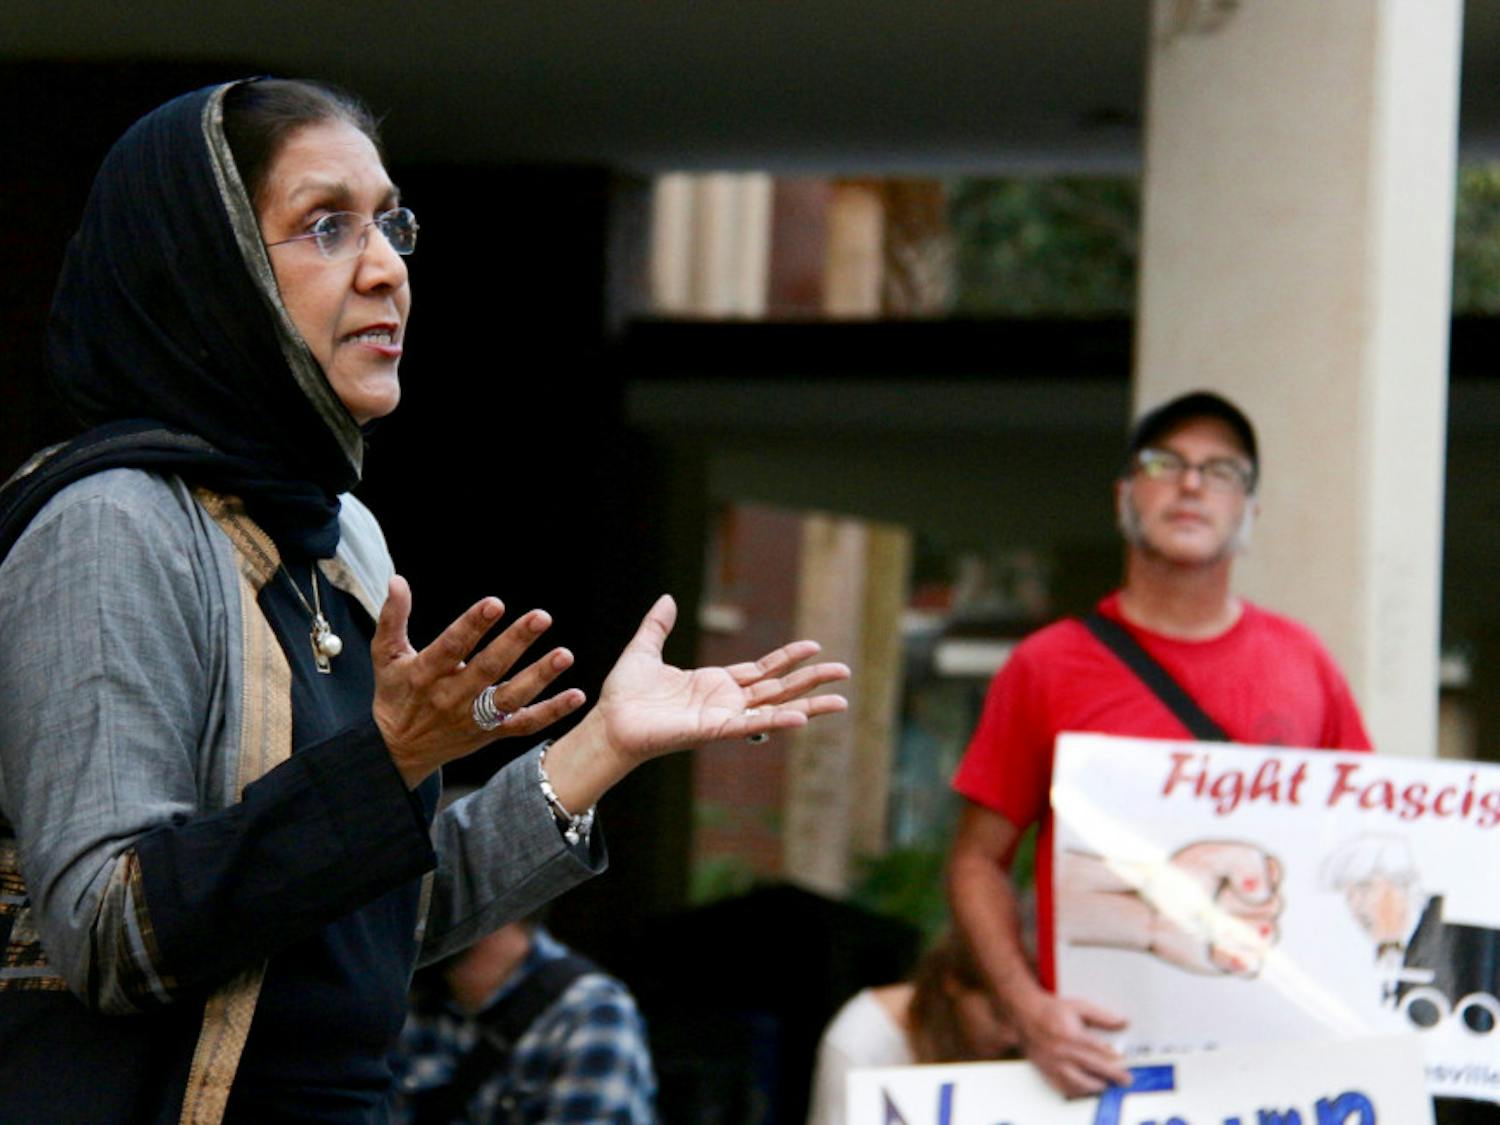 Indian-American immigrant Aqueela Khuddus, 63, explains to a group of about 30 people how welcoming Americans were when she emigrated to the U.S. about 50 years ago. The director of a nonprofit organization, the Khadija Foundation, was one of five speakers at the Rally Against Fascism and Xenophobia held on the Plaza of the Americas on Monday night.